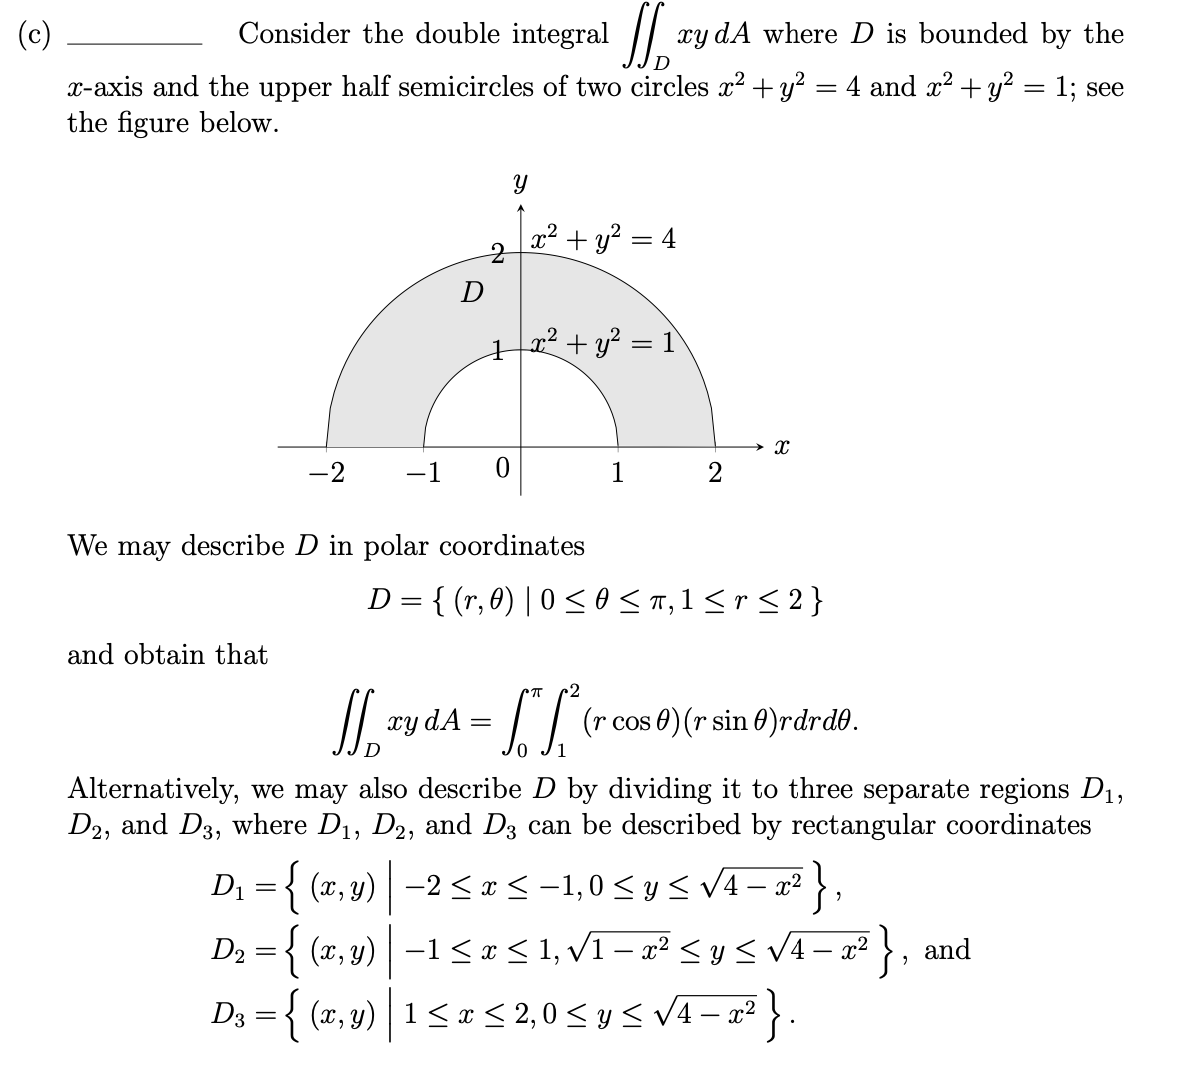 (c)
Consider the double integral ||
xy dA where D is bounded by the
x-axis and the upper half semicircles of two circles x? + y? = 4 and x? +y? = 1; see
the figure below.
x² + y? = 4
12²+ y² = 1
-2
-1
1
2
We may describe D in polar coordinates
D = { (r, 0) | 0 <o < T,1 < r < 2 }
and obtain that
2
xy dA =
I/ (r cos 0) (r sin 0)rdrdð.
Alternatively, we may also describe D by dividing it to three separate regions D1,
D2, and D3, where D1, D2, and D3 can be described by rectangular coordinates
D; = { (r, 3) | –2 <= <-1,0 < y< V4 – a² },
D2 ={ (x, y) –1 < x < 1, v1 – x² < y< V4- x² } , and
D3 = { (x, y) | 1 < x < 2,0 < y < v4 – x² .
